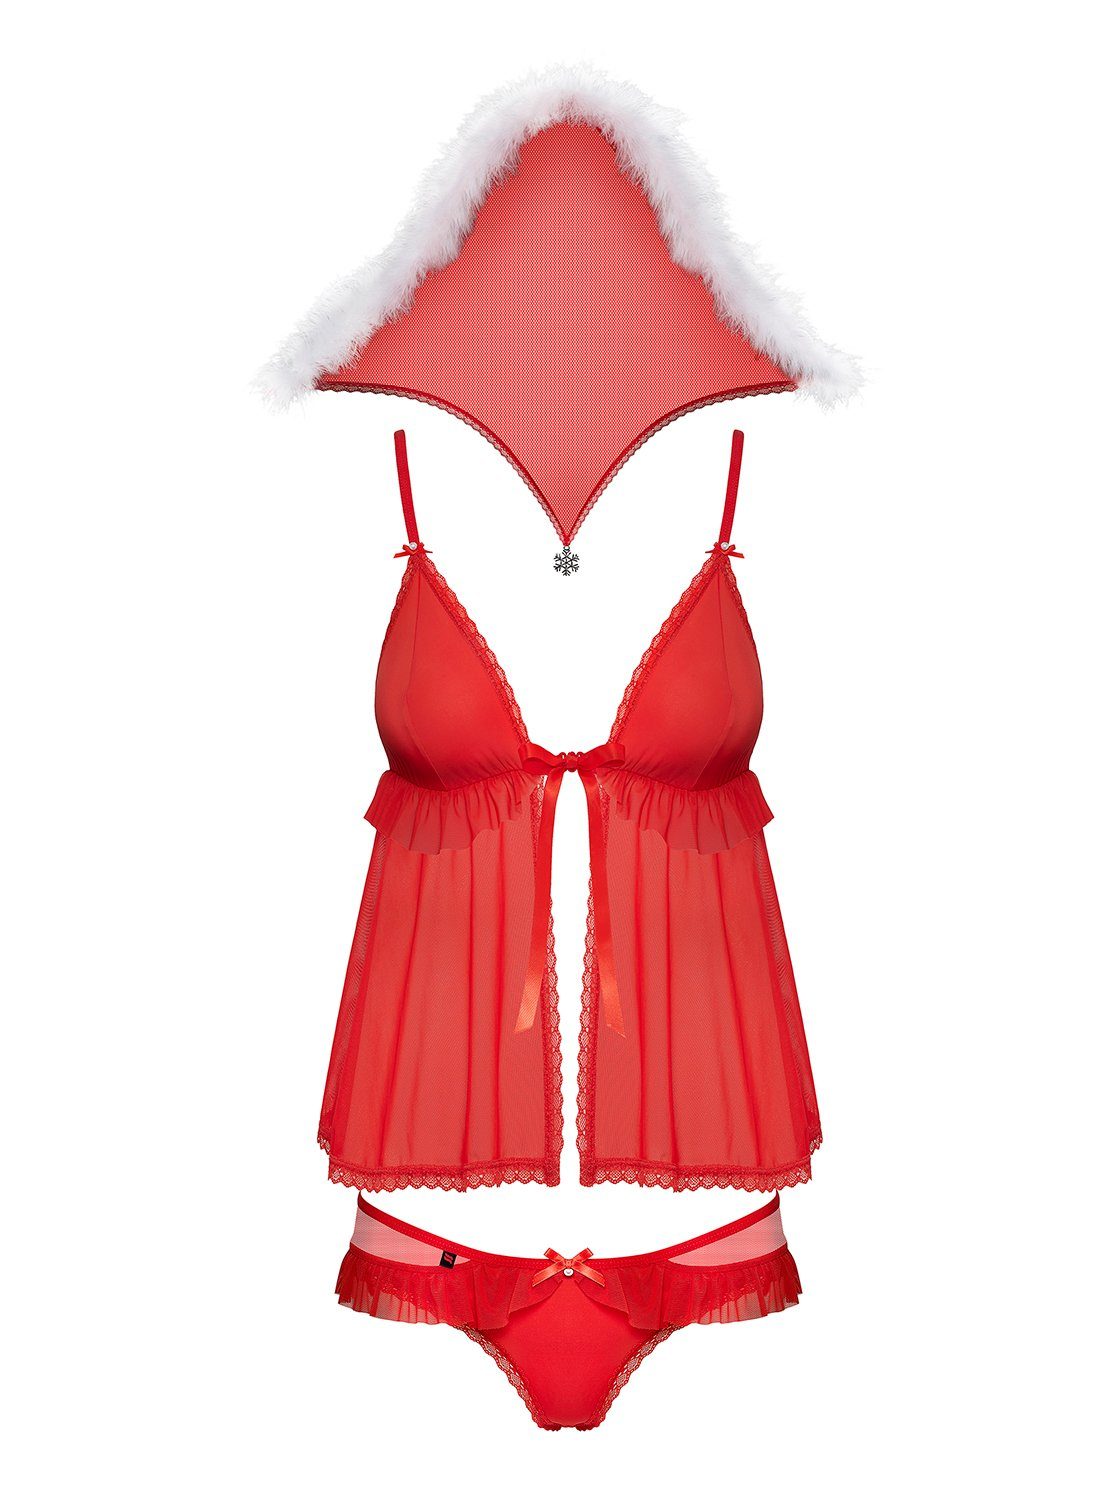 Kapuze 3-tlg. Xmas-Outfit Weihnachtskostüm in Babydoll EU Obsessive Made mit Negligé